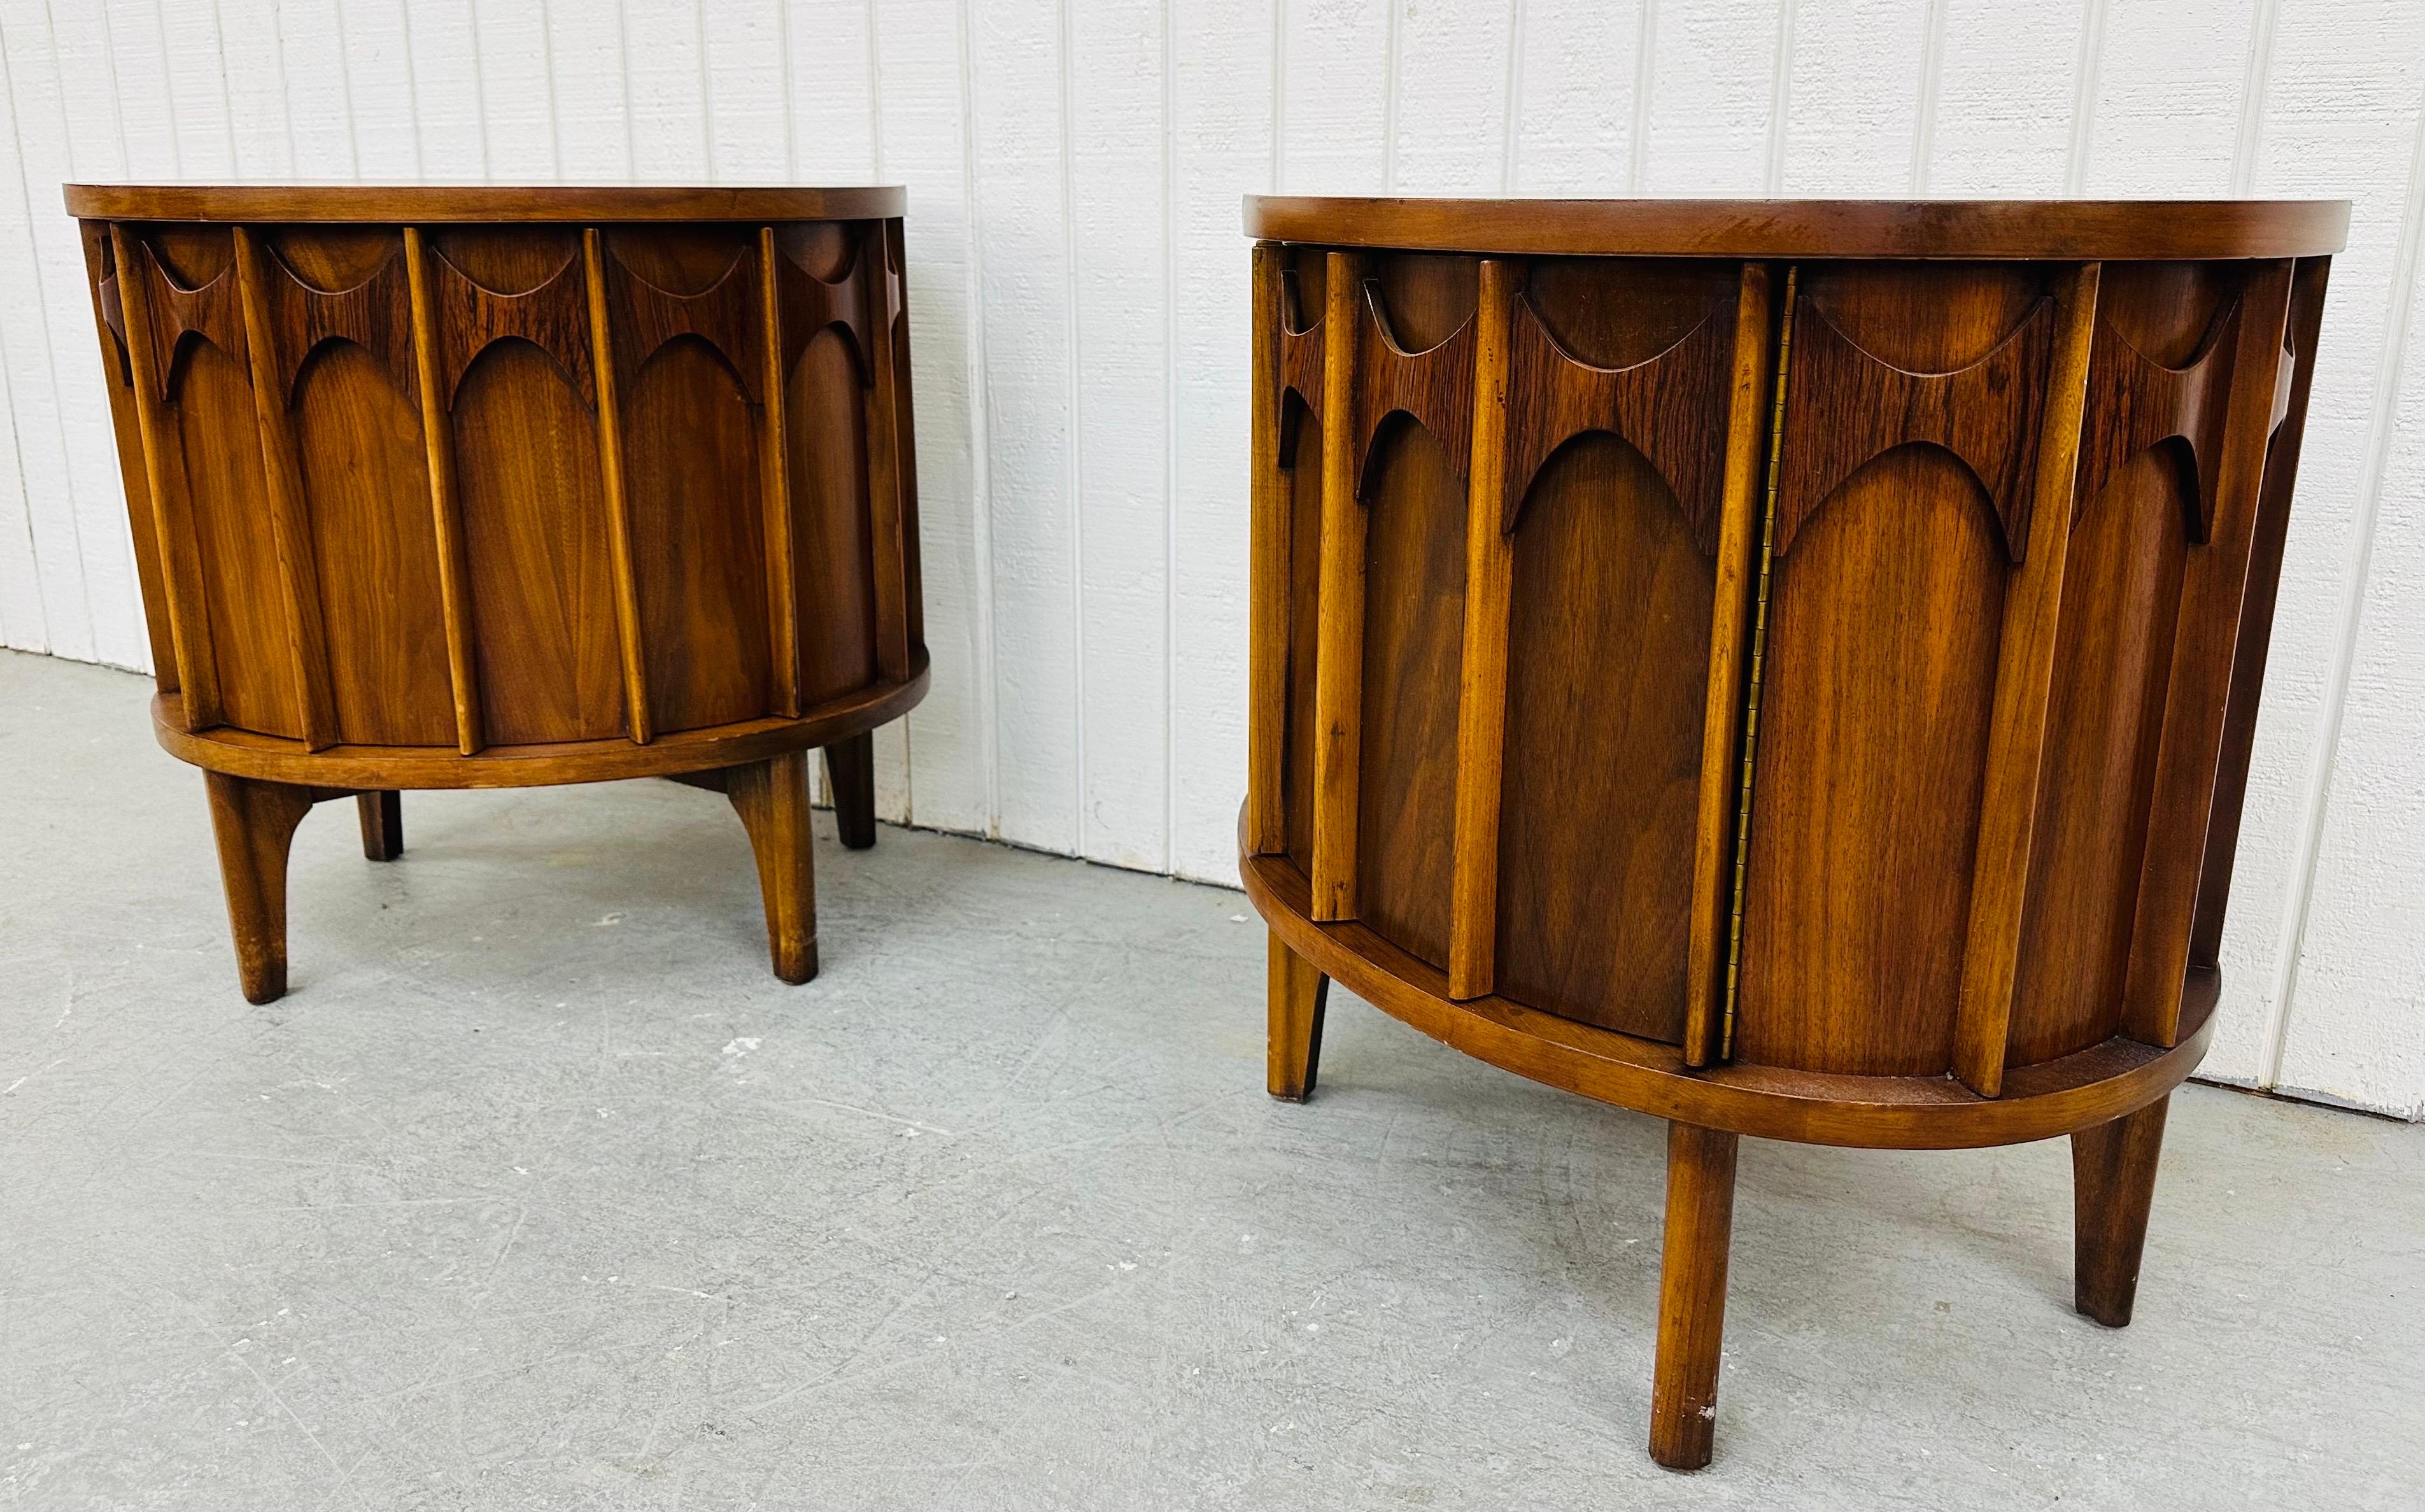 This listing is for a pair of Mid-Century Modern Kent Coffey Perspecta Walnut Nightstands. Featuring a rounded design, single door that opens up to storage space, a single drawer, sculpted rosewood across the top, modern legs, and a beautiful walnut